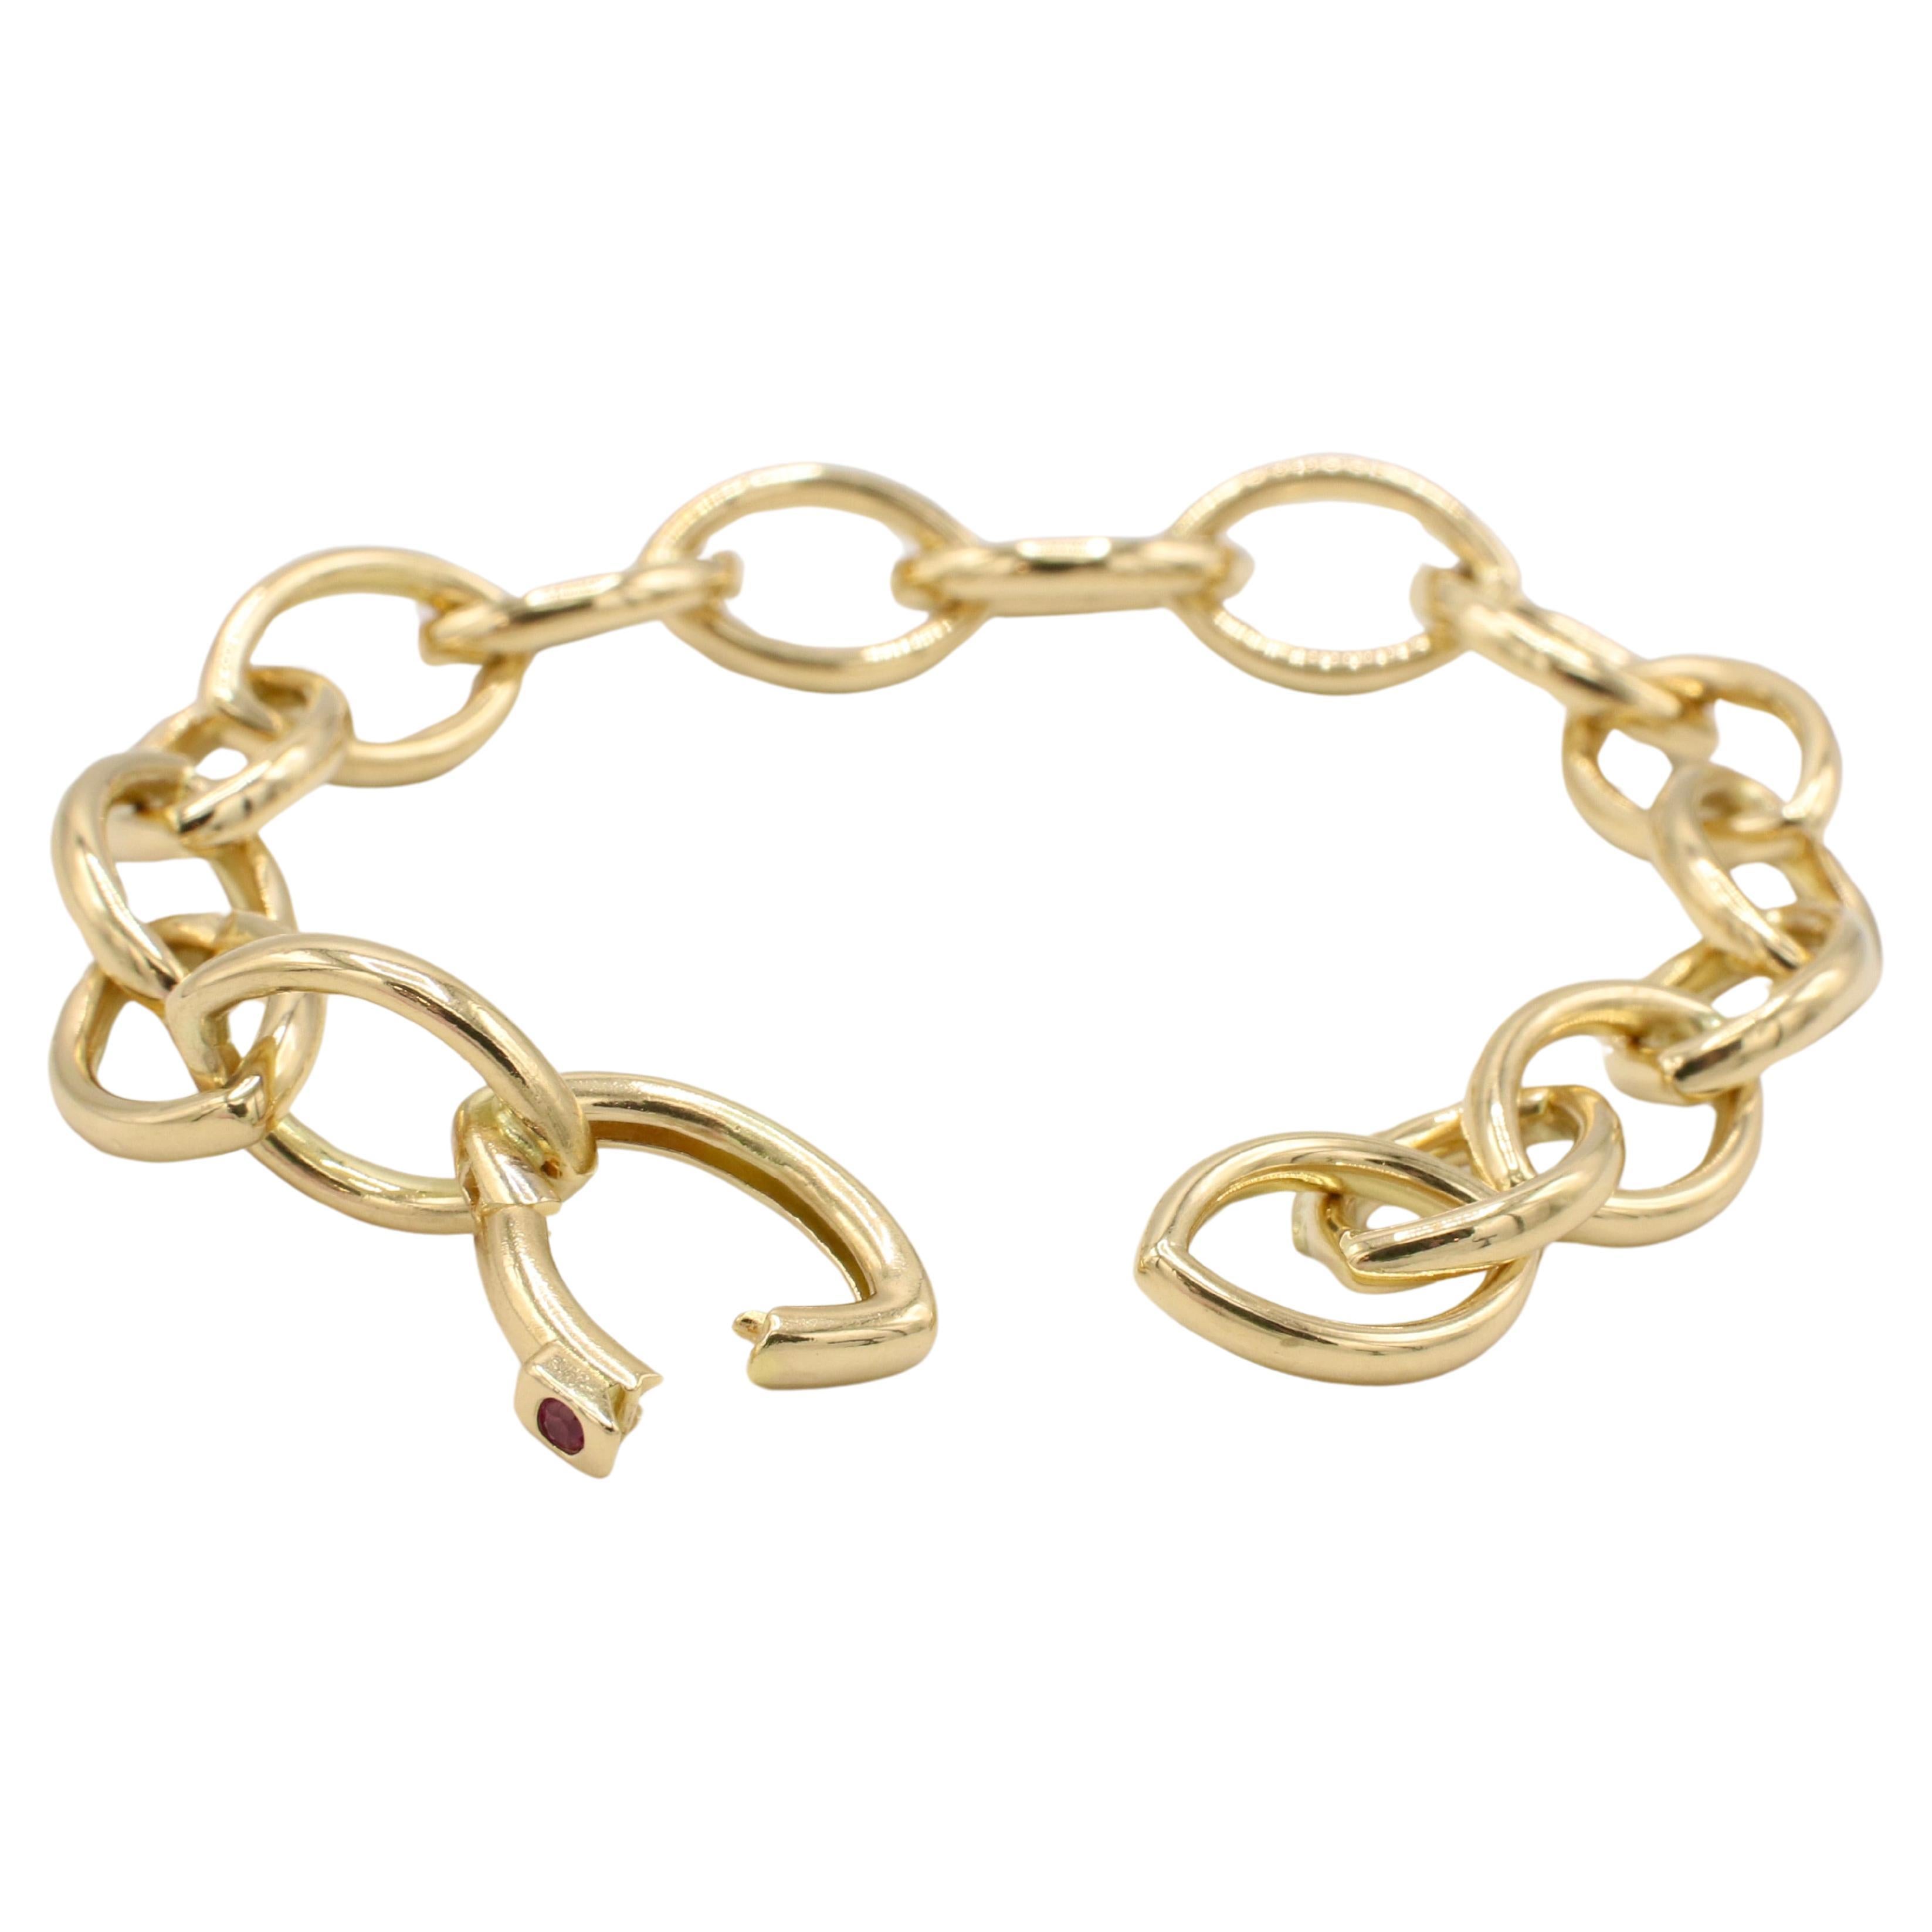 Roberto Coin 18 Karat Yellow Gold Solid Link Bracelet 
Metal: 18k yellow gold
Weight: 13.6 grams
Links: 10 x 15.5 x 2.5mm
Length: 7.5 inches
